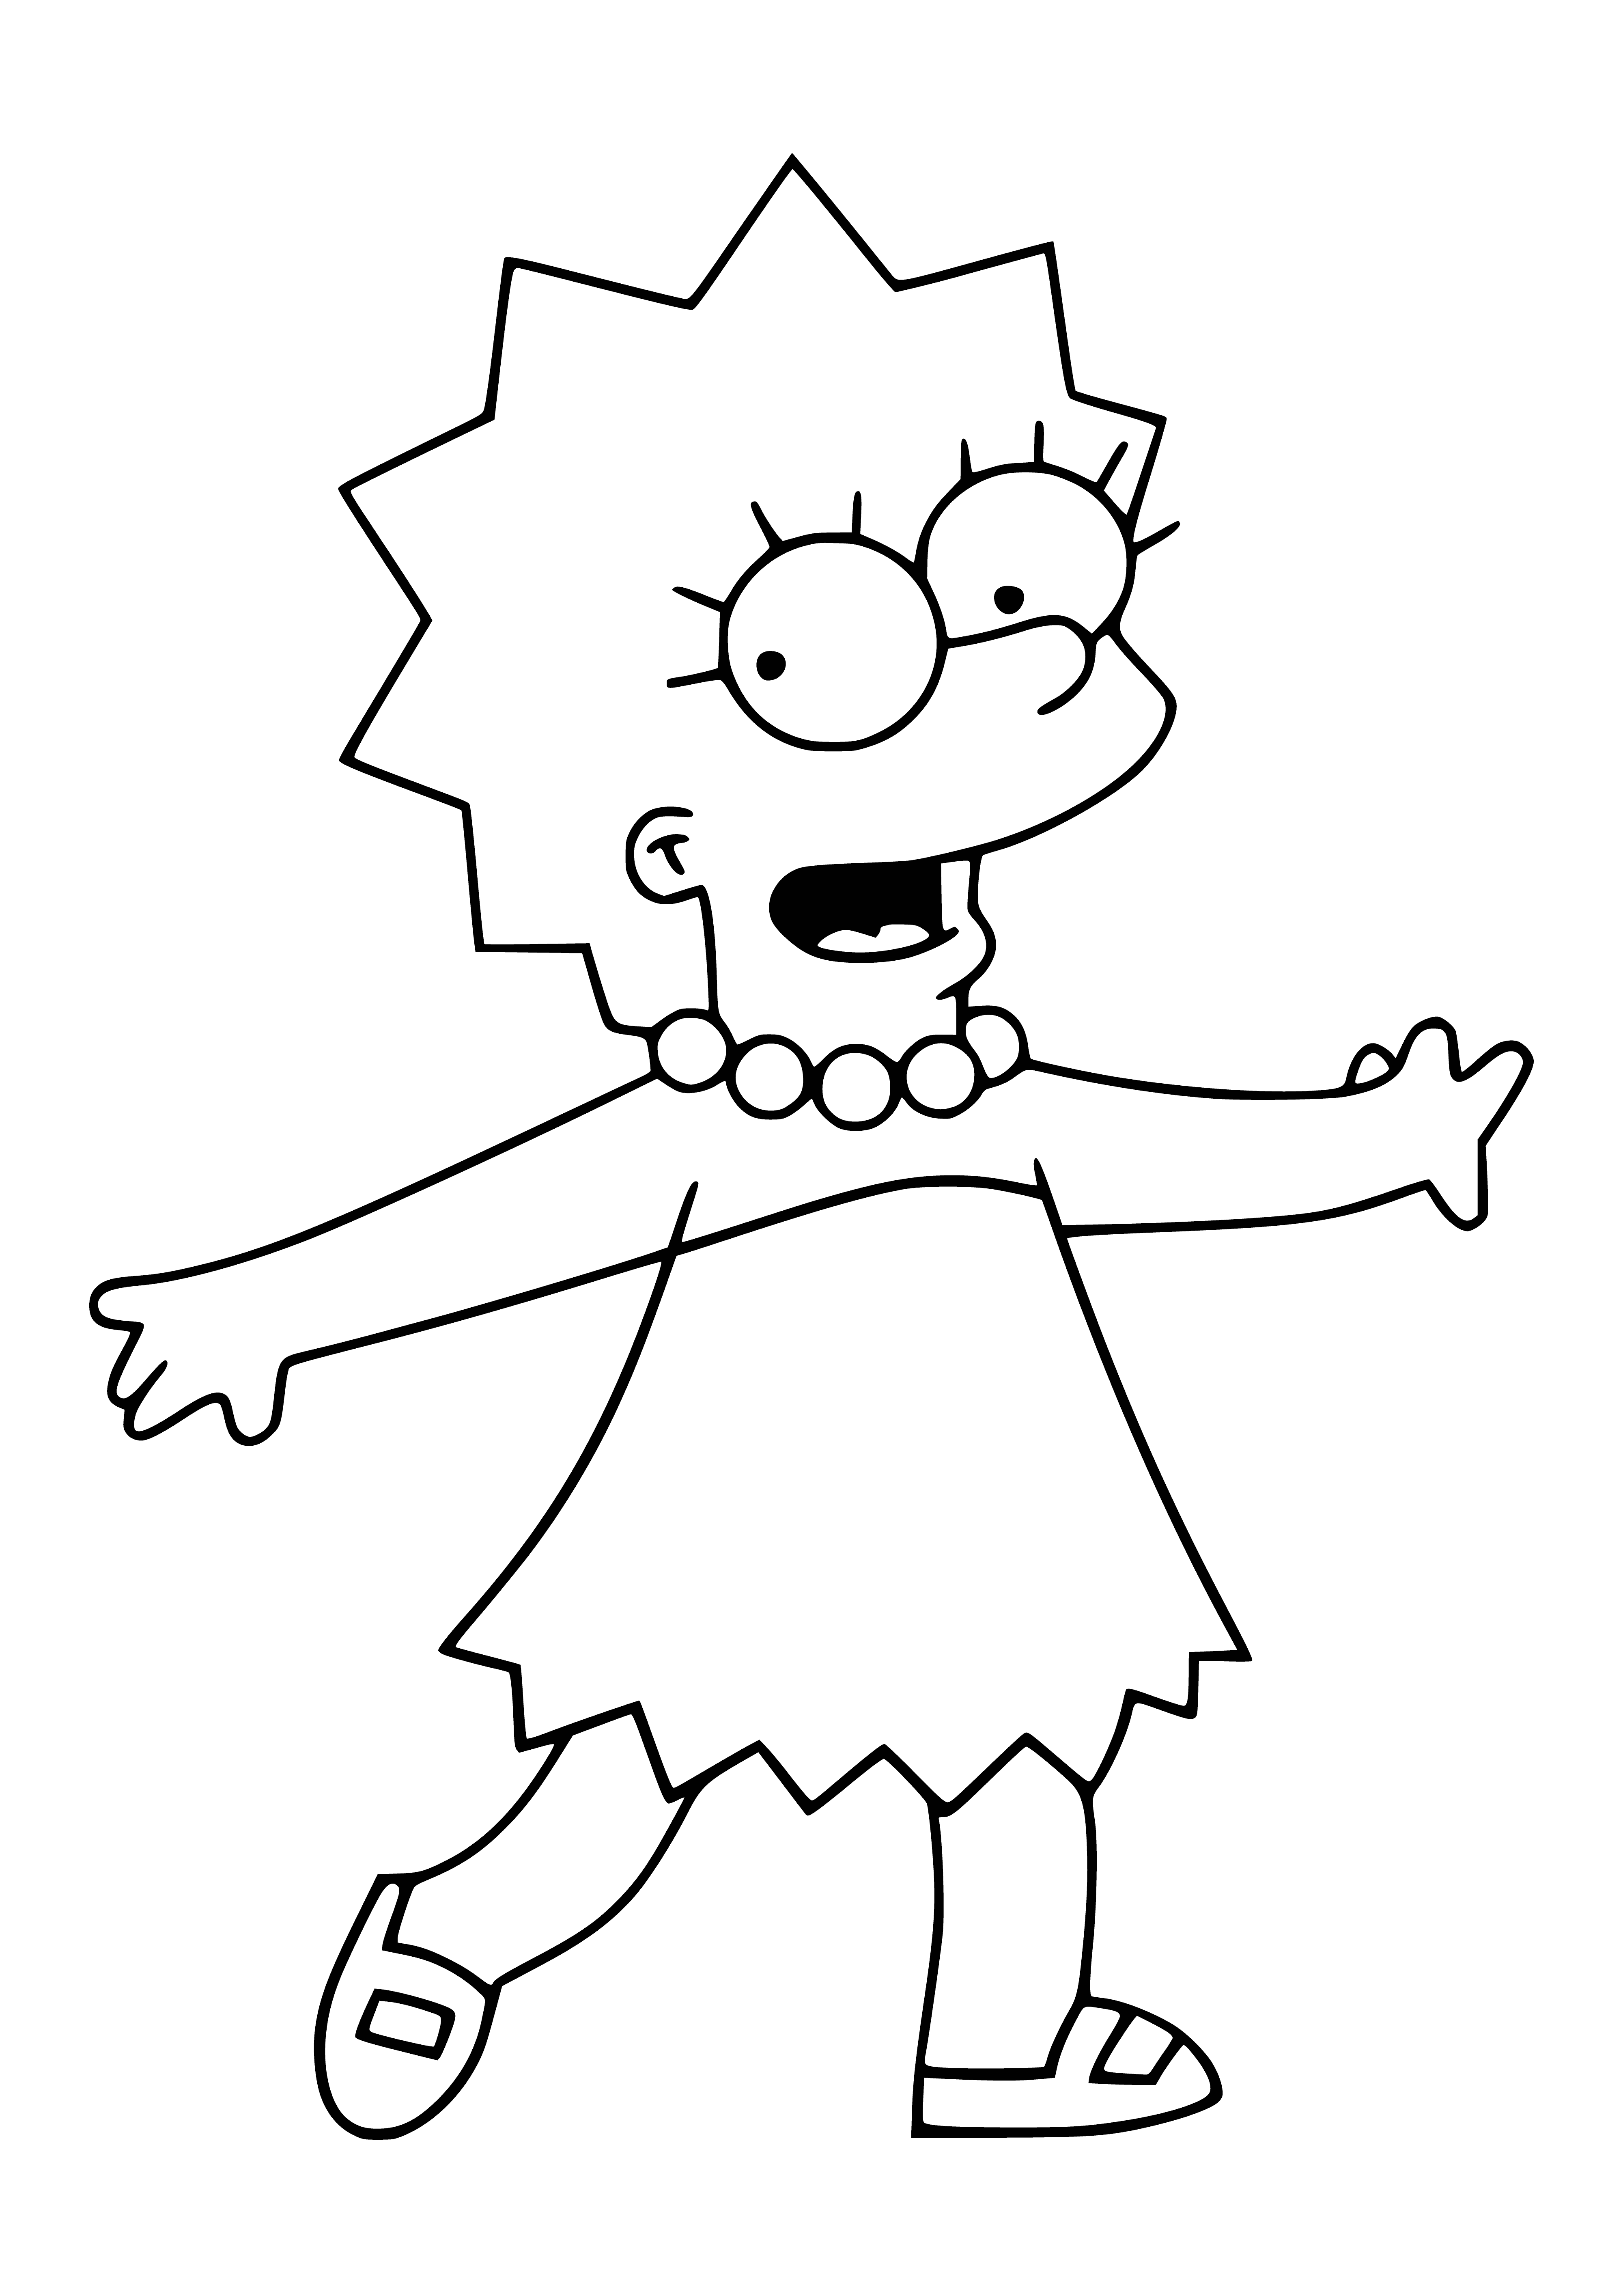 coloring page: "Lisa Simpson is an intelligent 8-yr-old who is a vegetarian, a talented jazz saxophonist, and a straight-A student. She stands up to bullying despite being labeled a nerd or geek."